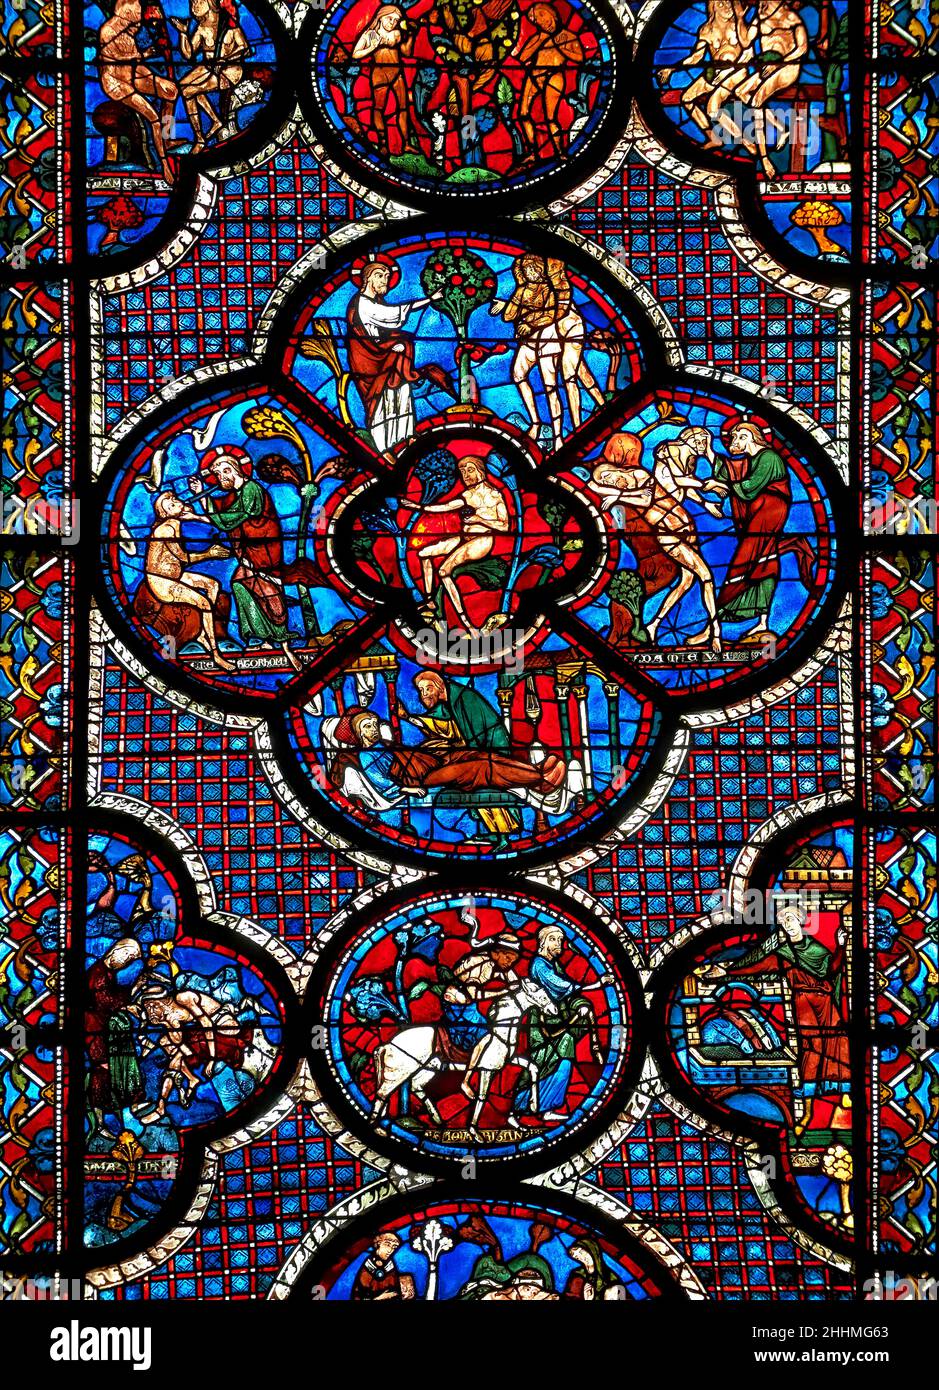 Medieval stained glass Window of the Gothic Cathedral of Chartres, France - dedicated to the Good Samaritan . Central panel shows Adam dwelling in Par Stock Photo